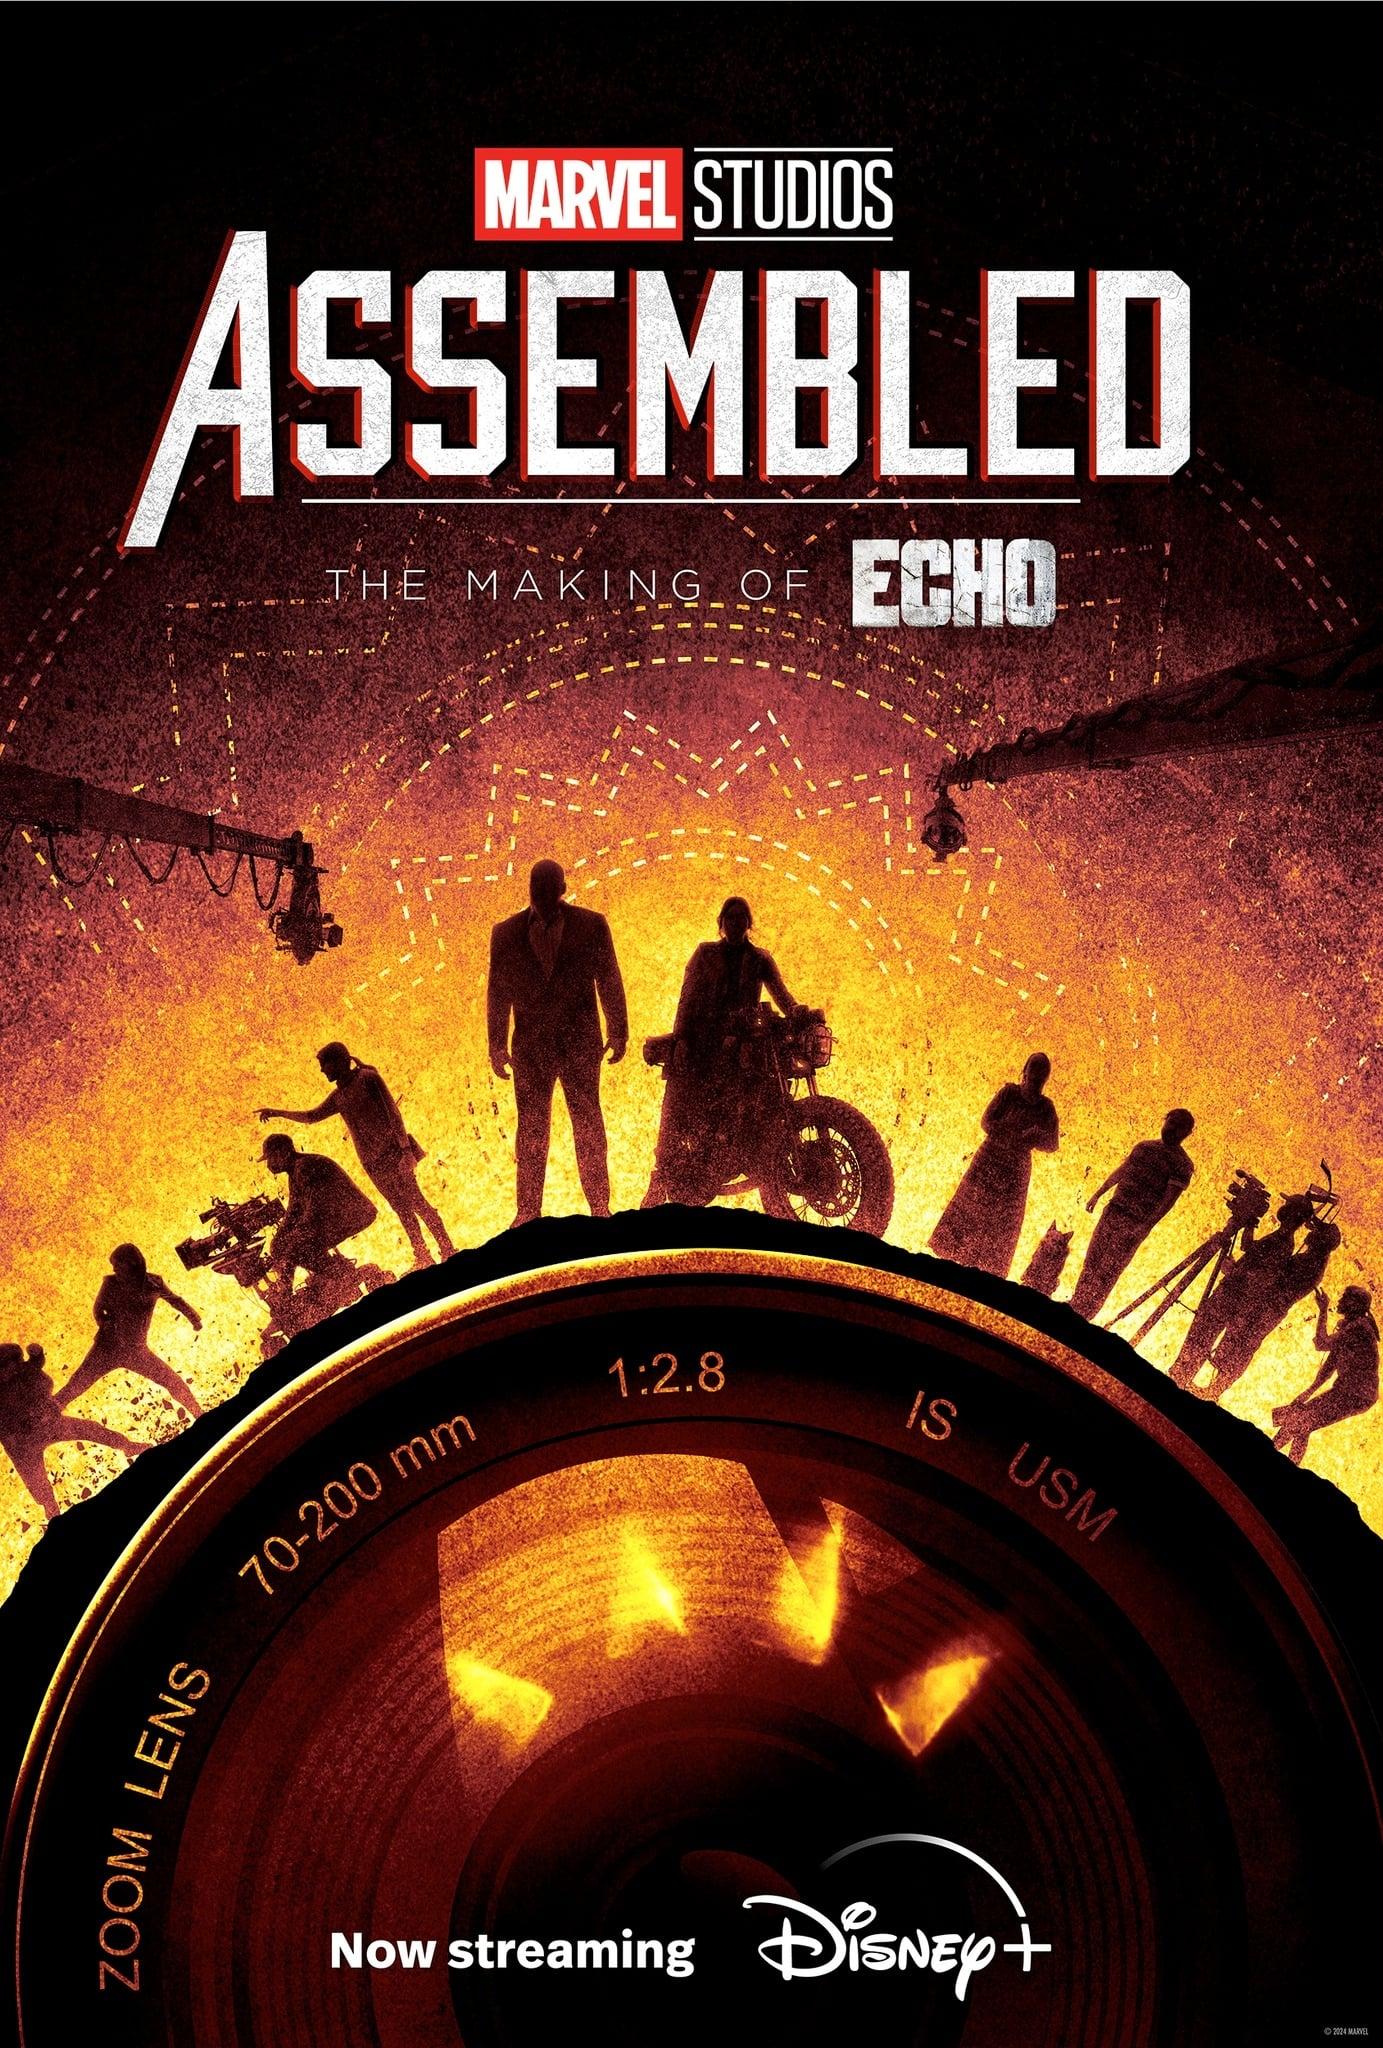 Marvel Studios Assembled: The Making of Echo poster